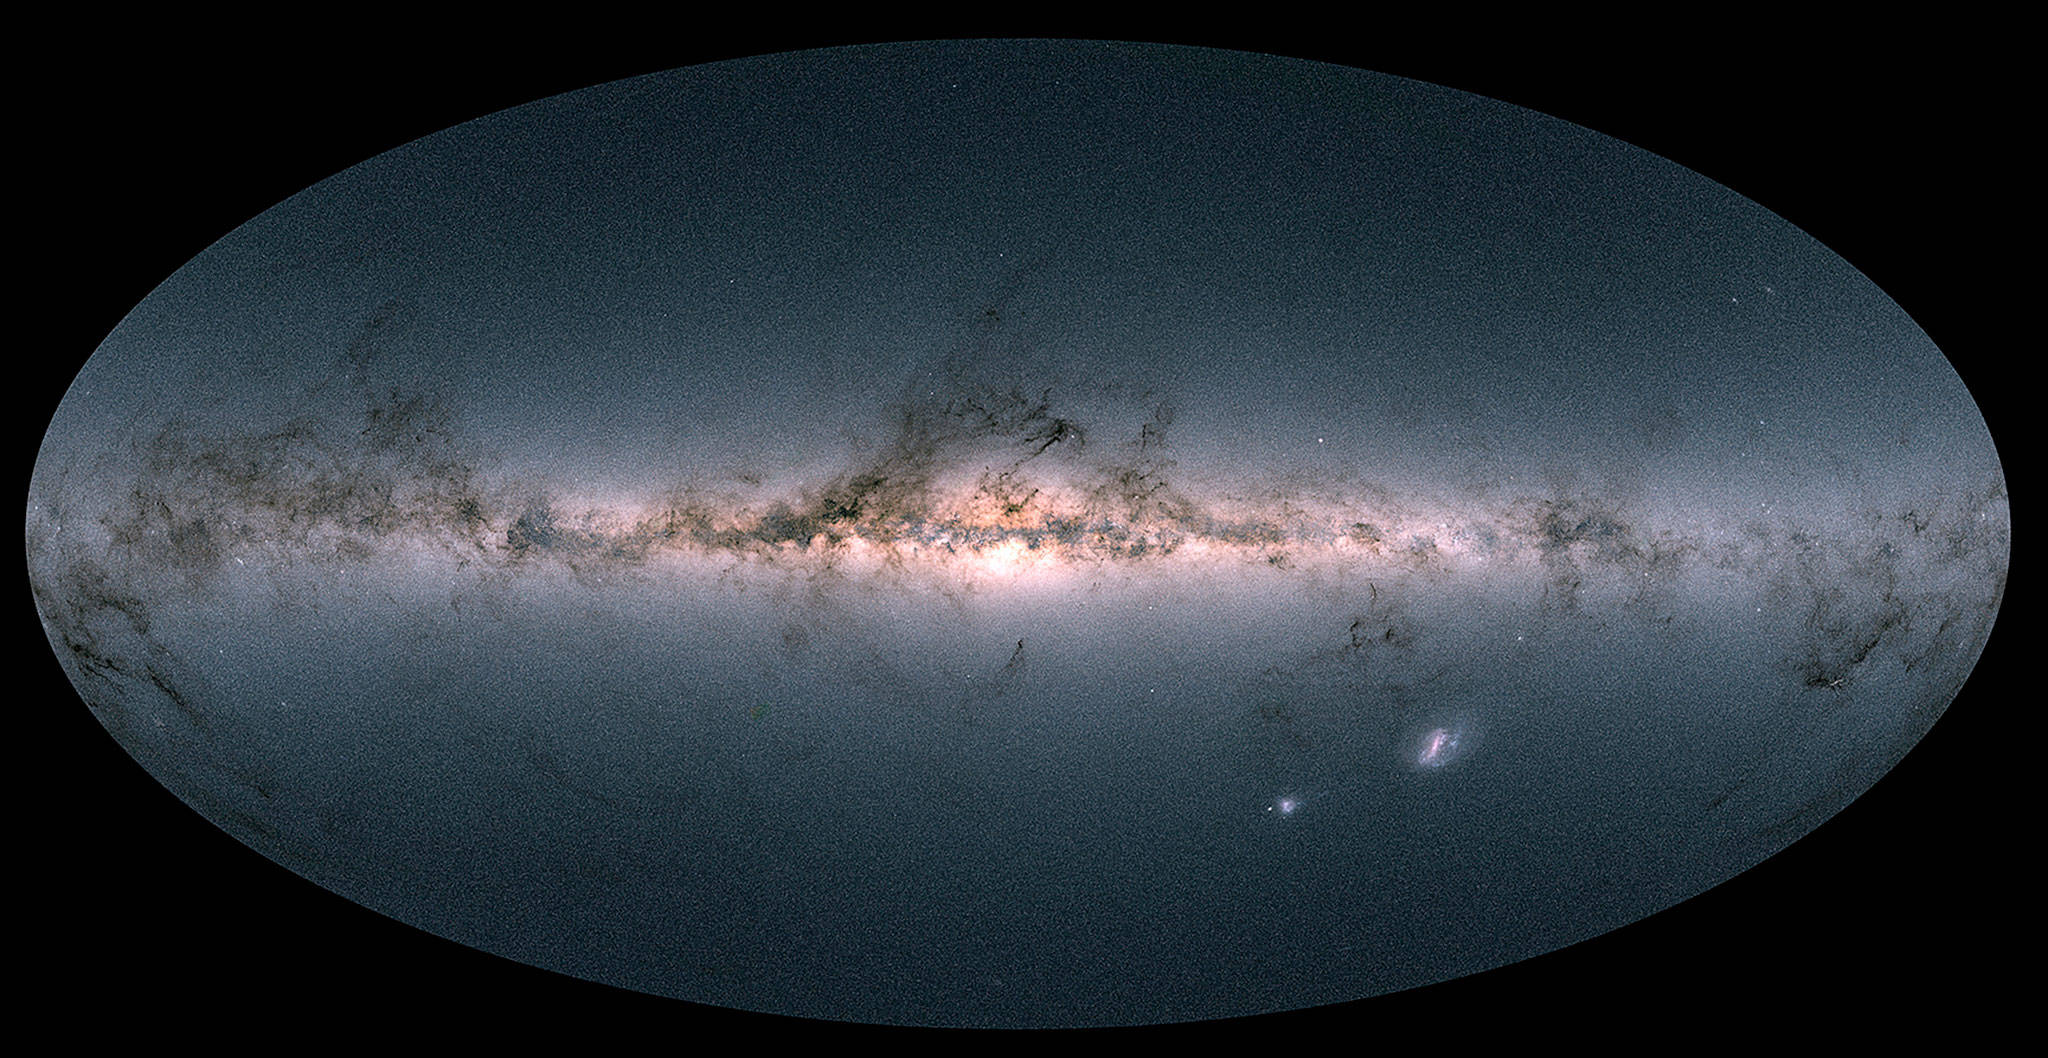 This image is the Gaia satellite’s all-sky view of our Milky Way Galaxy and neighboring galaxies, based on measurements of nearly 1.7 billion stars. The map shows the total brightness and color of stars observed by the European Space Agency satellite in each portion of the sky between July 2014 and May 2016. (ESA via AP)